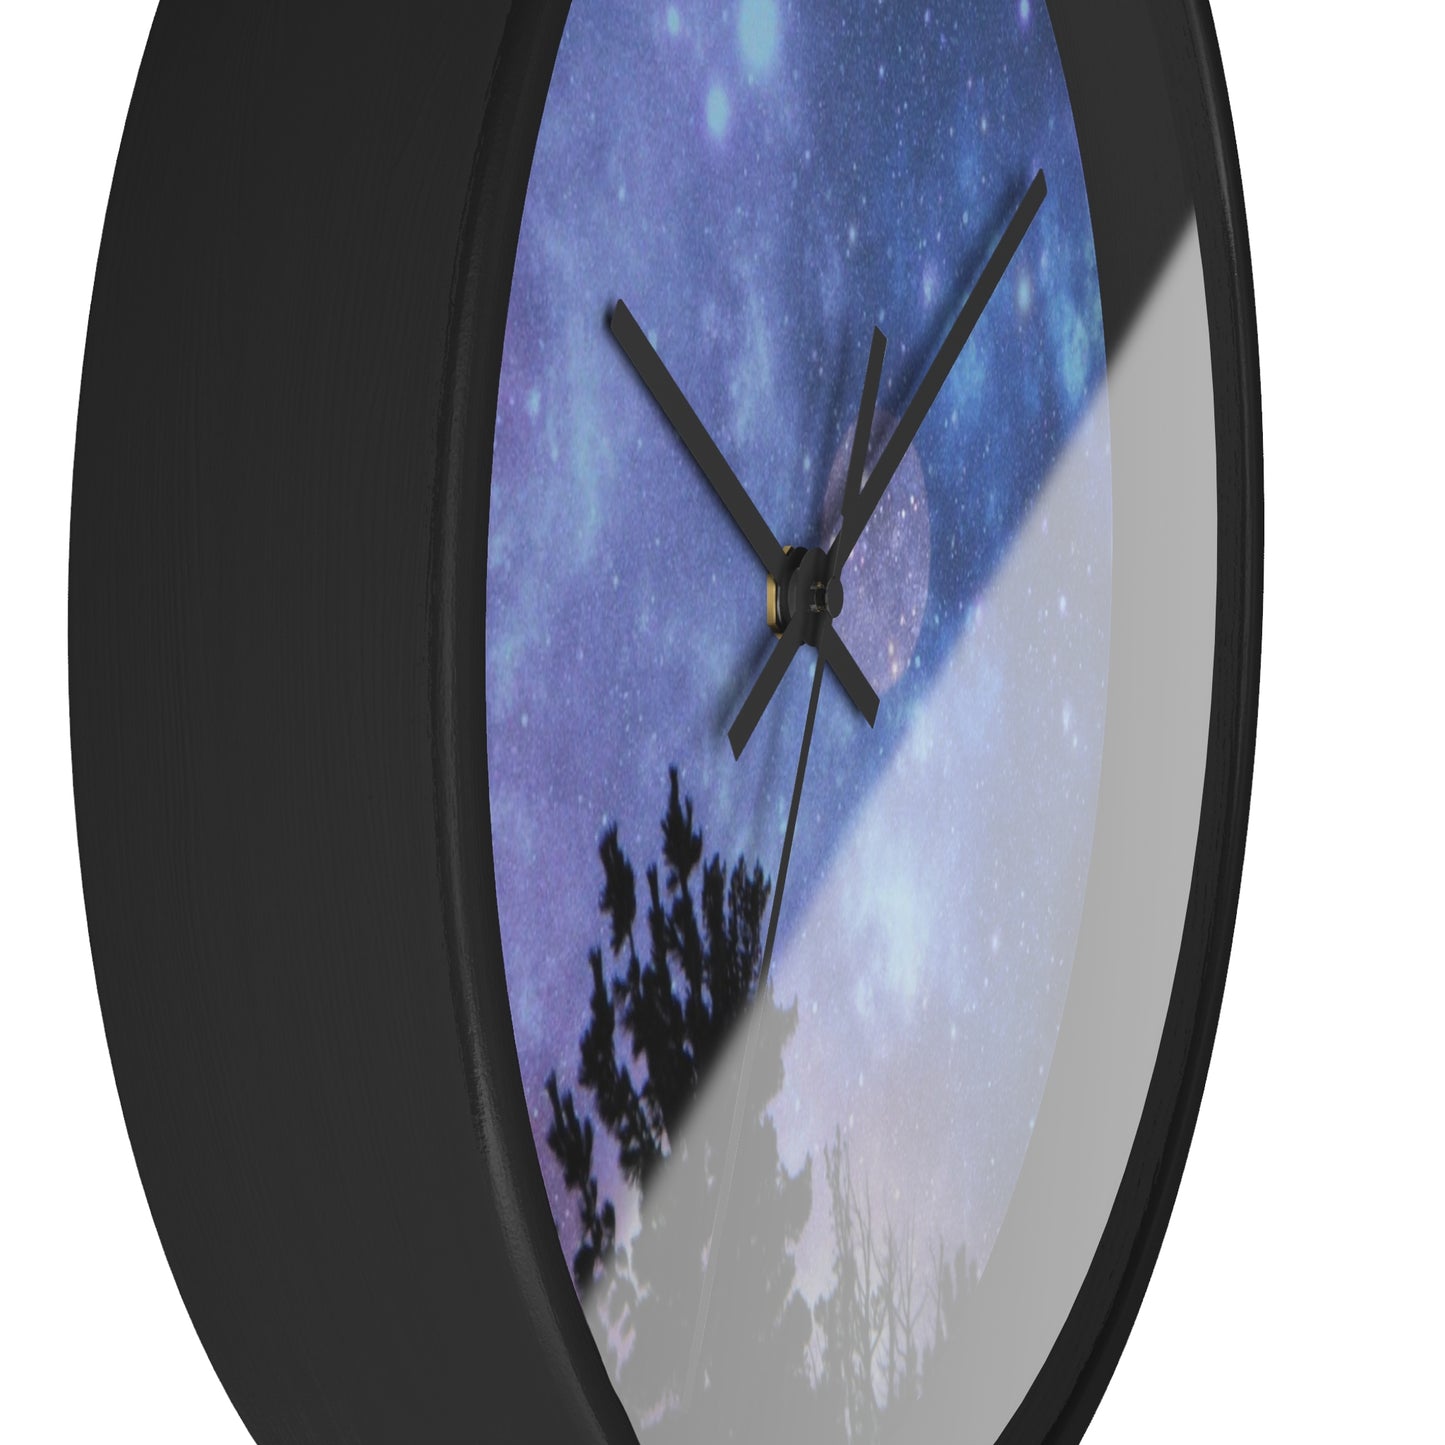 An American made Blue-Moon Wall Clock with a starry night sky and tree silhouettes printed on its face by Printify.